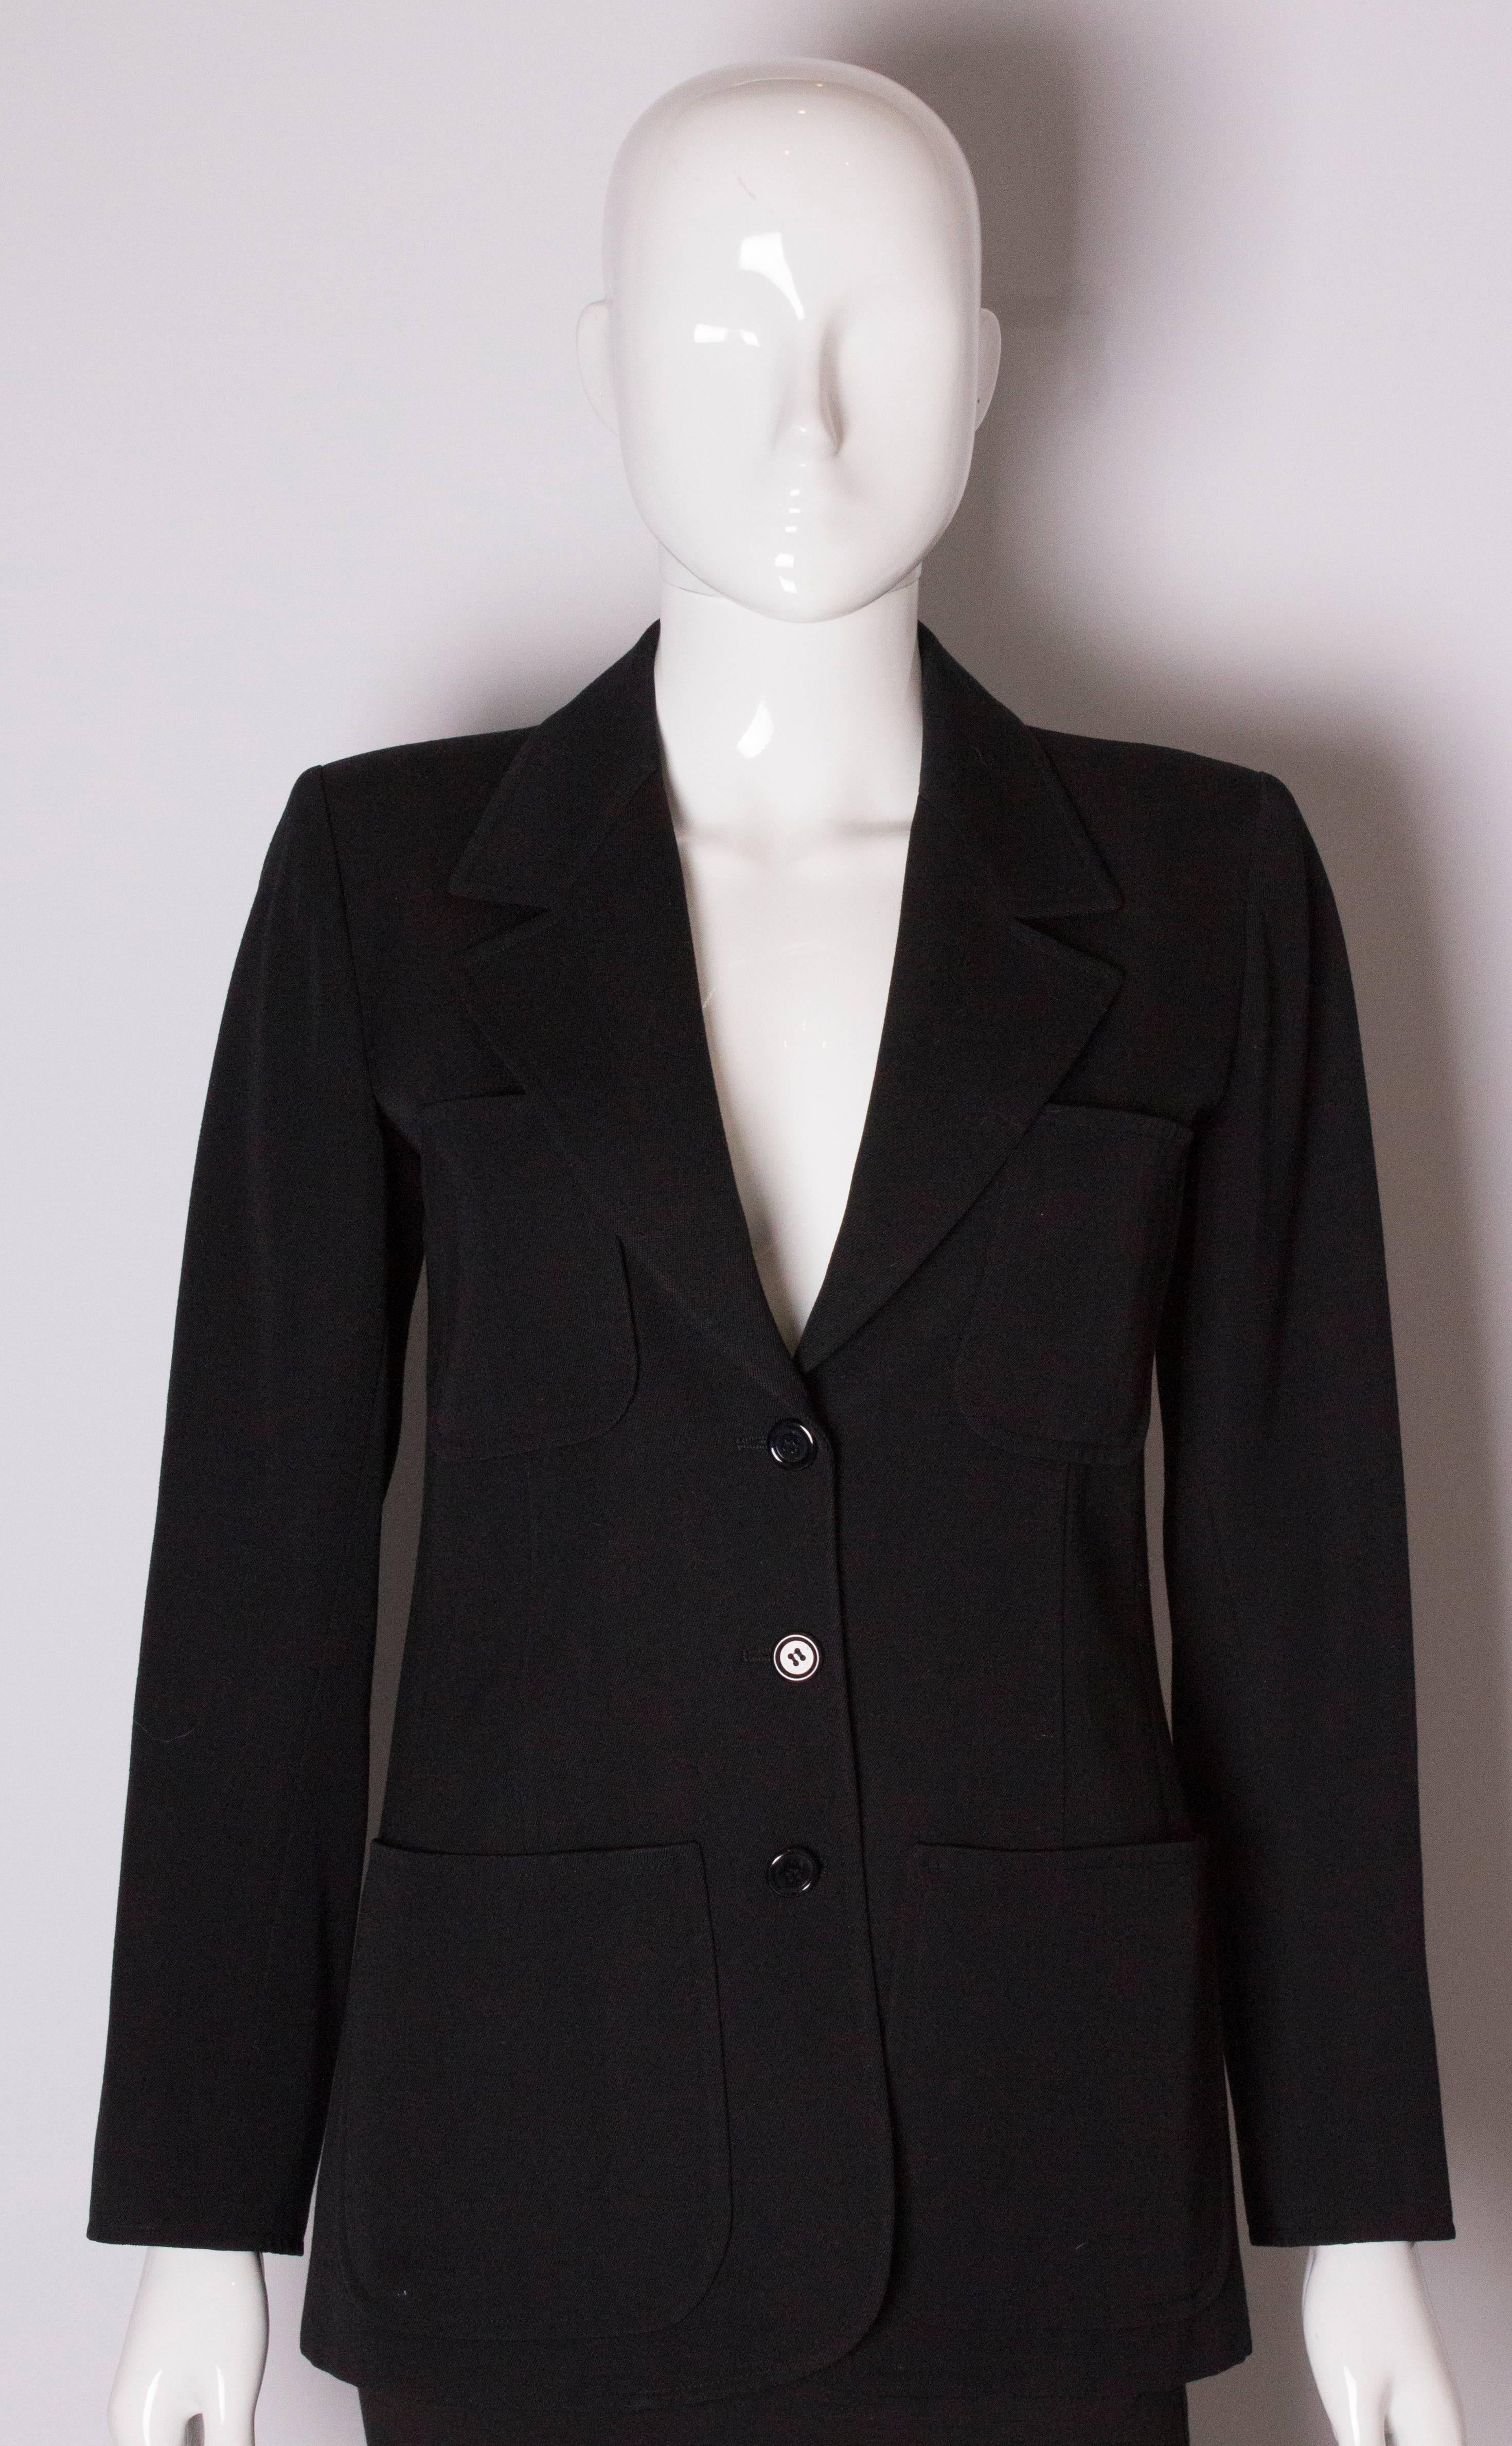 A chic wool jacket by Yves Saint Laurent Rive Gauche. In a dark blue wool, the jacket has 2 breast pockets and 2 pockets at hip leval. It has a 3 button opening at the front and 3 buttons on each cuff.